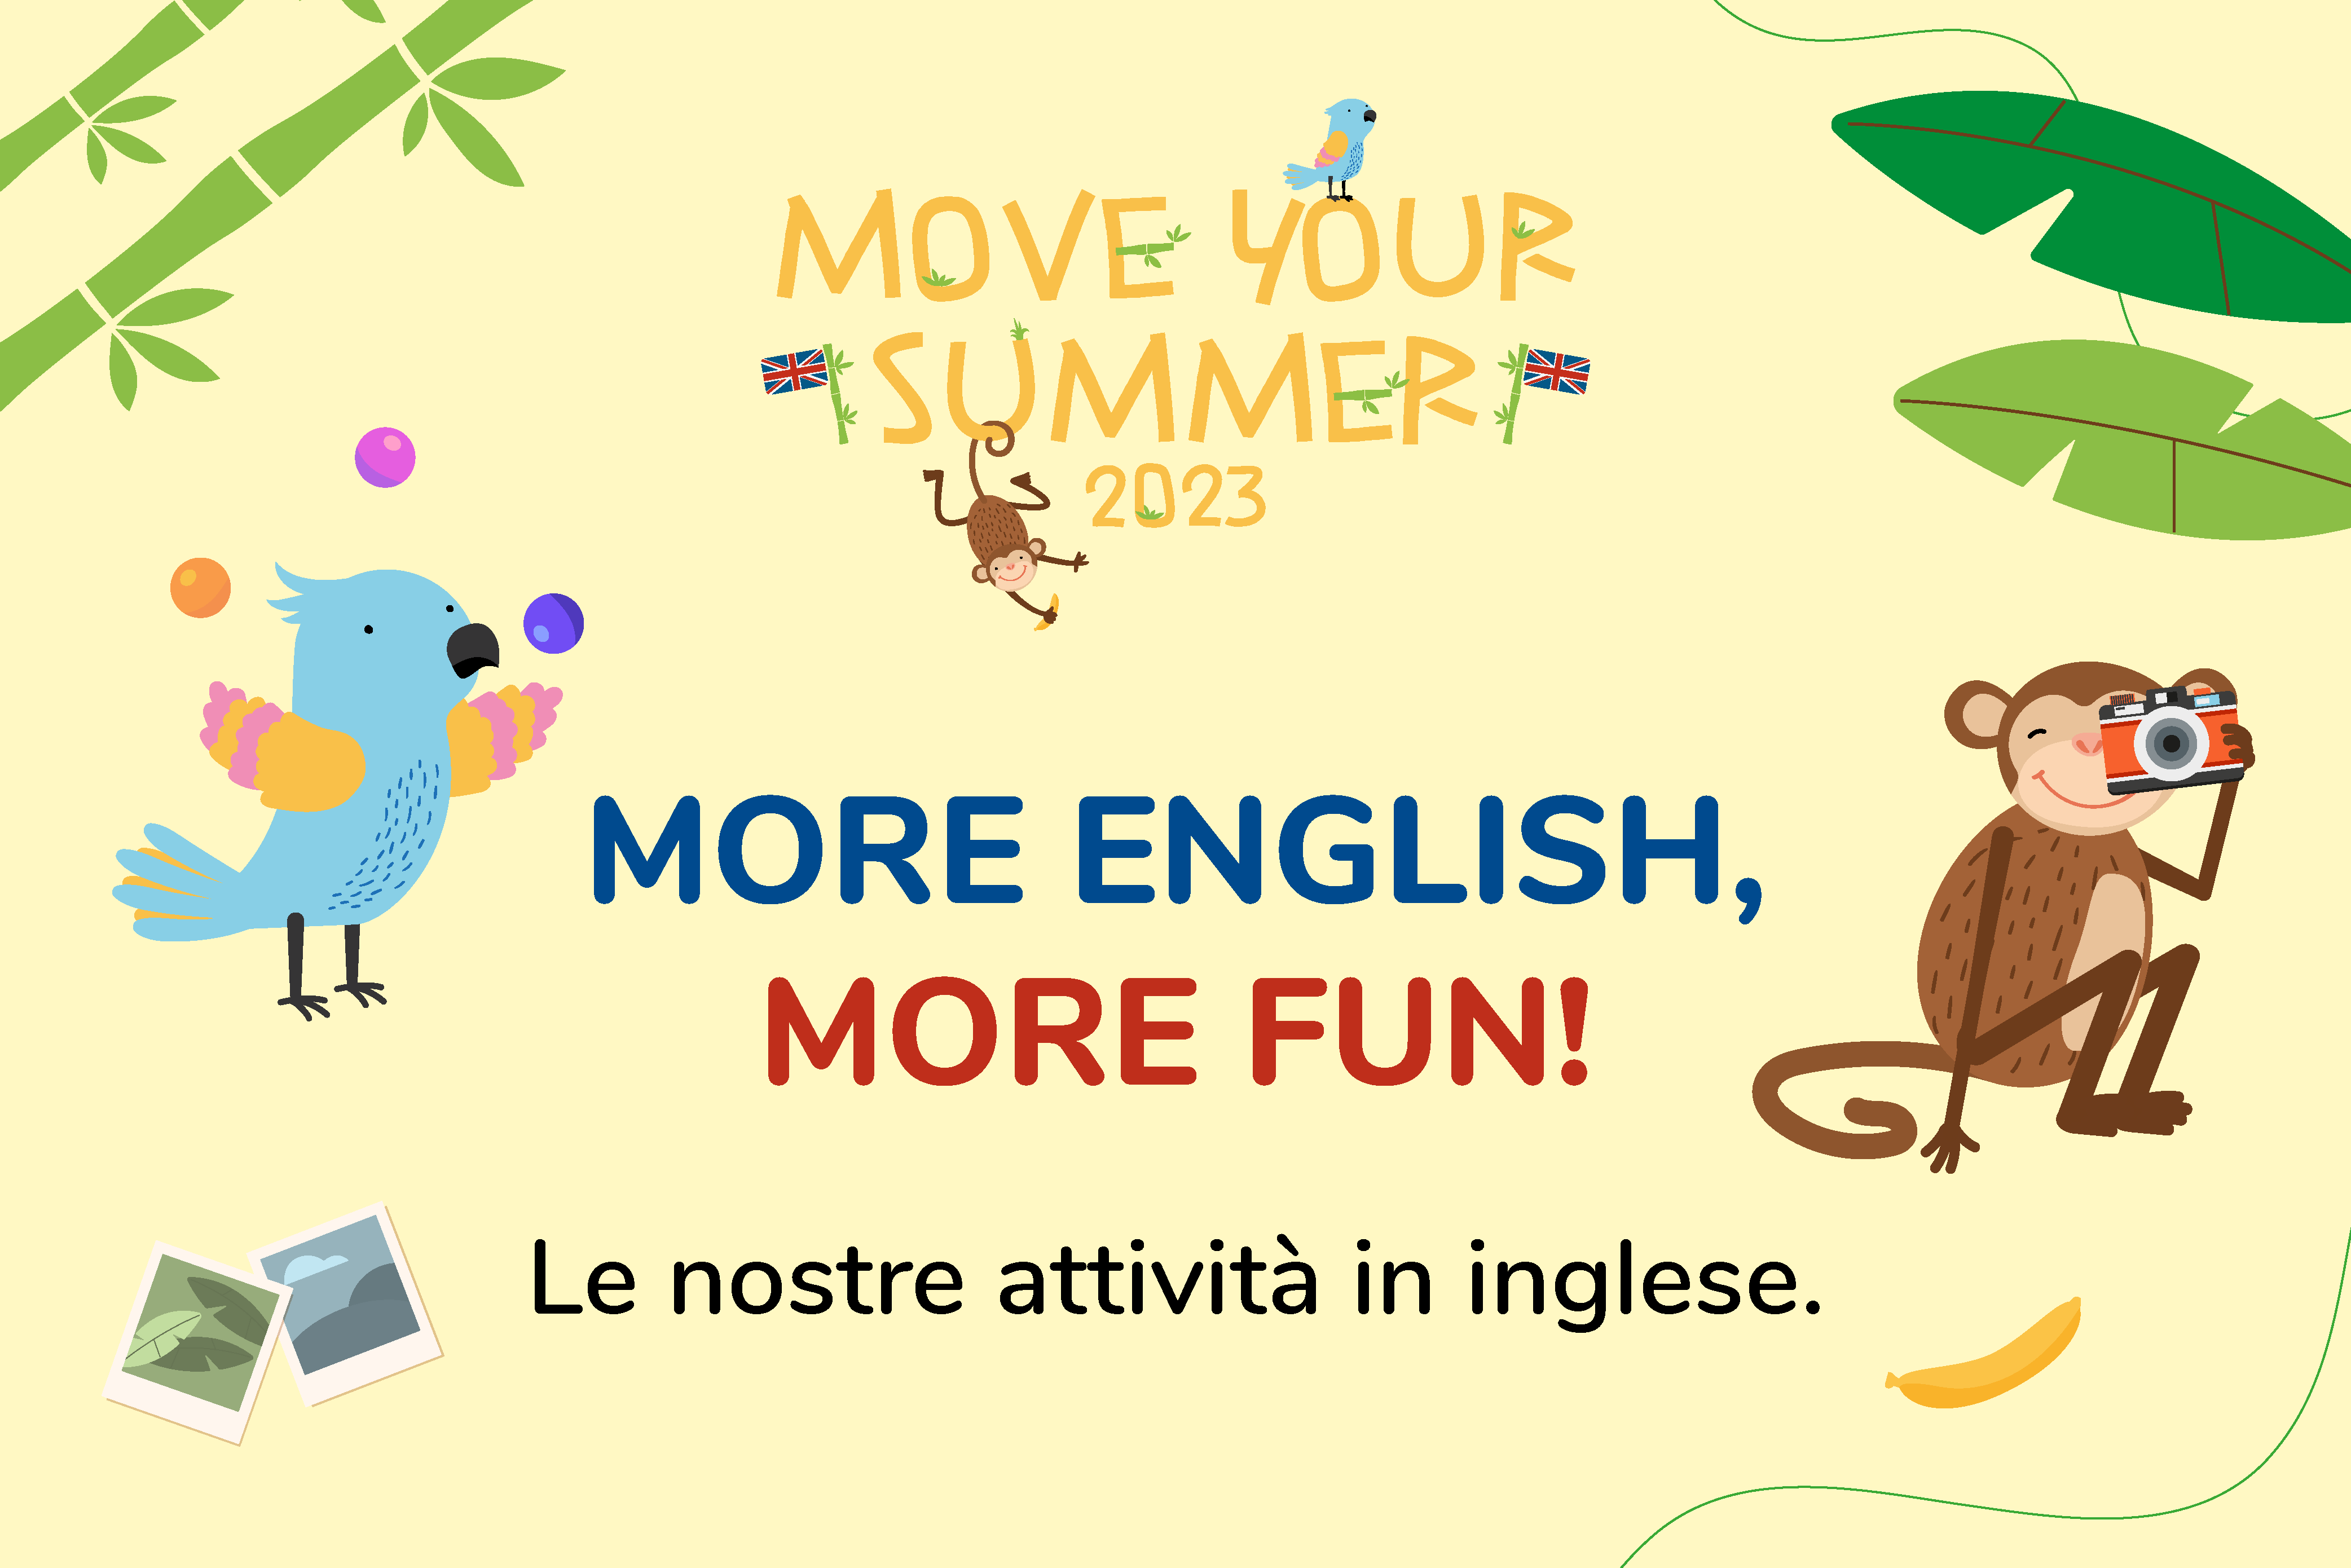 Move Your Summer is back! Find out our English activities!